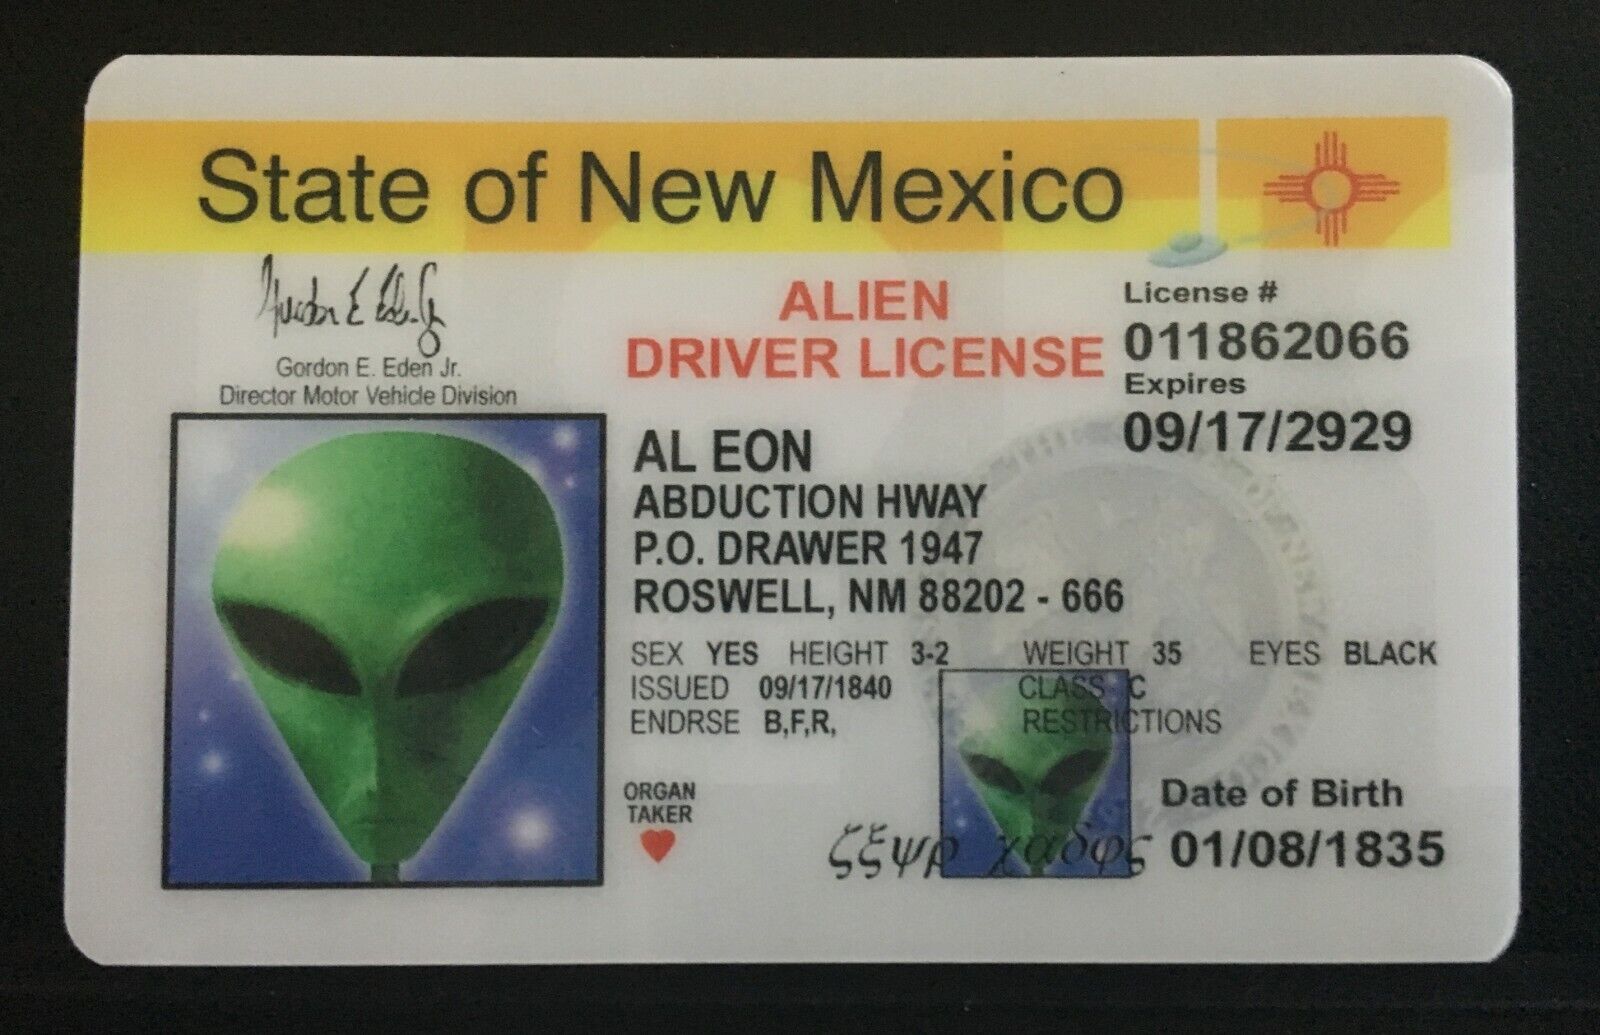 Alien AL Eon State of New Mexico Novelty Card UFO Roswell Aliens Spaceship 51